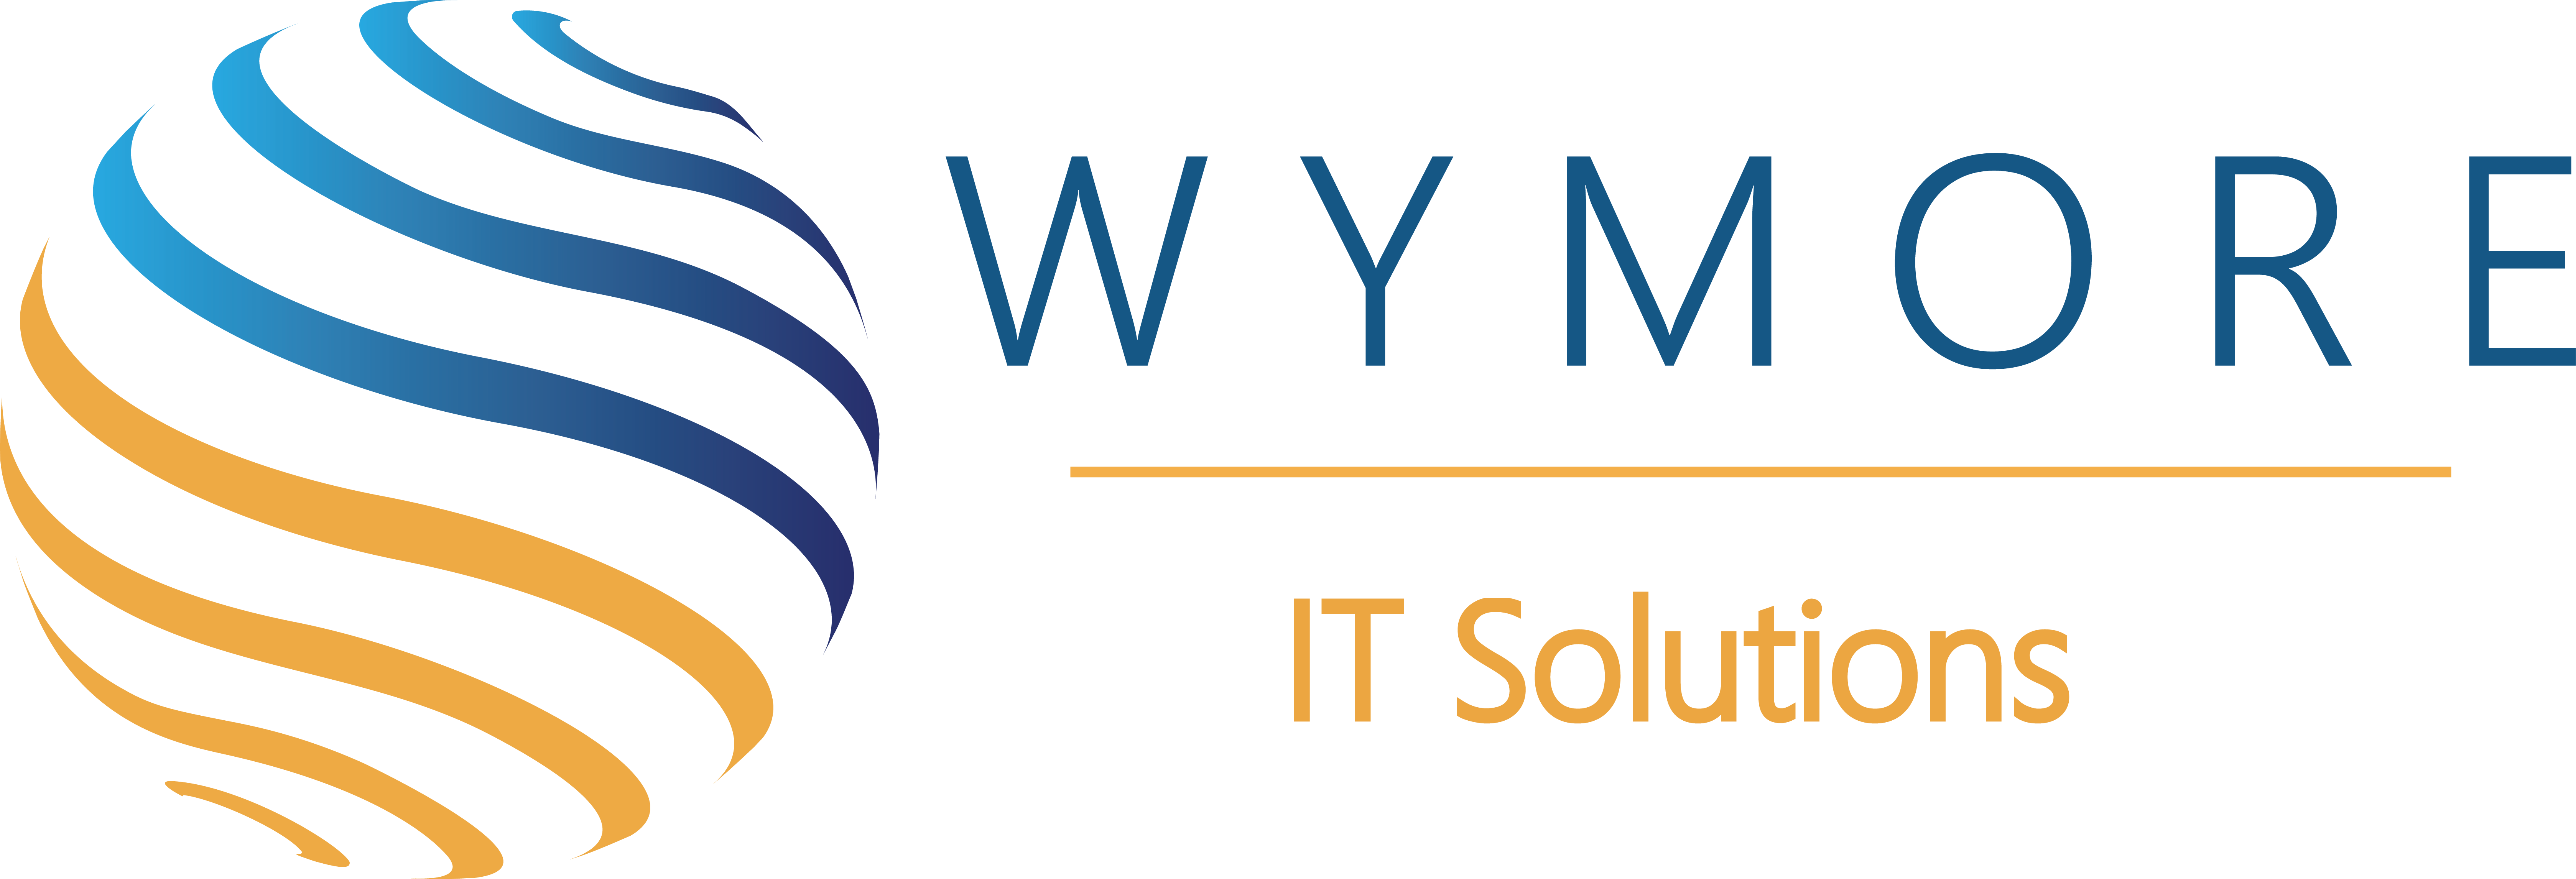 Wymore IT Solutions Limited